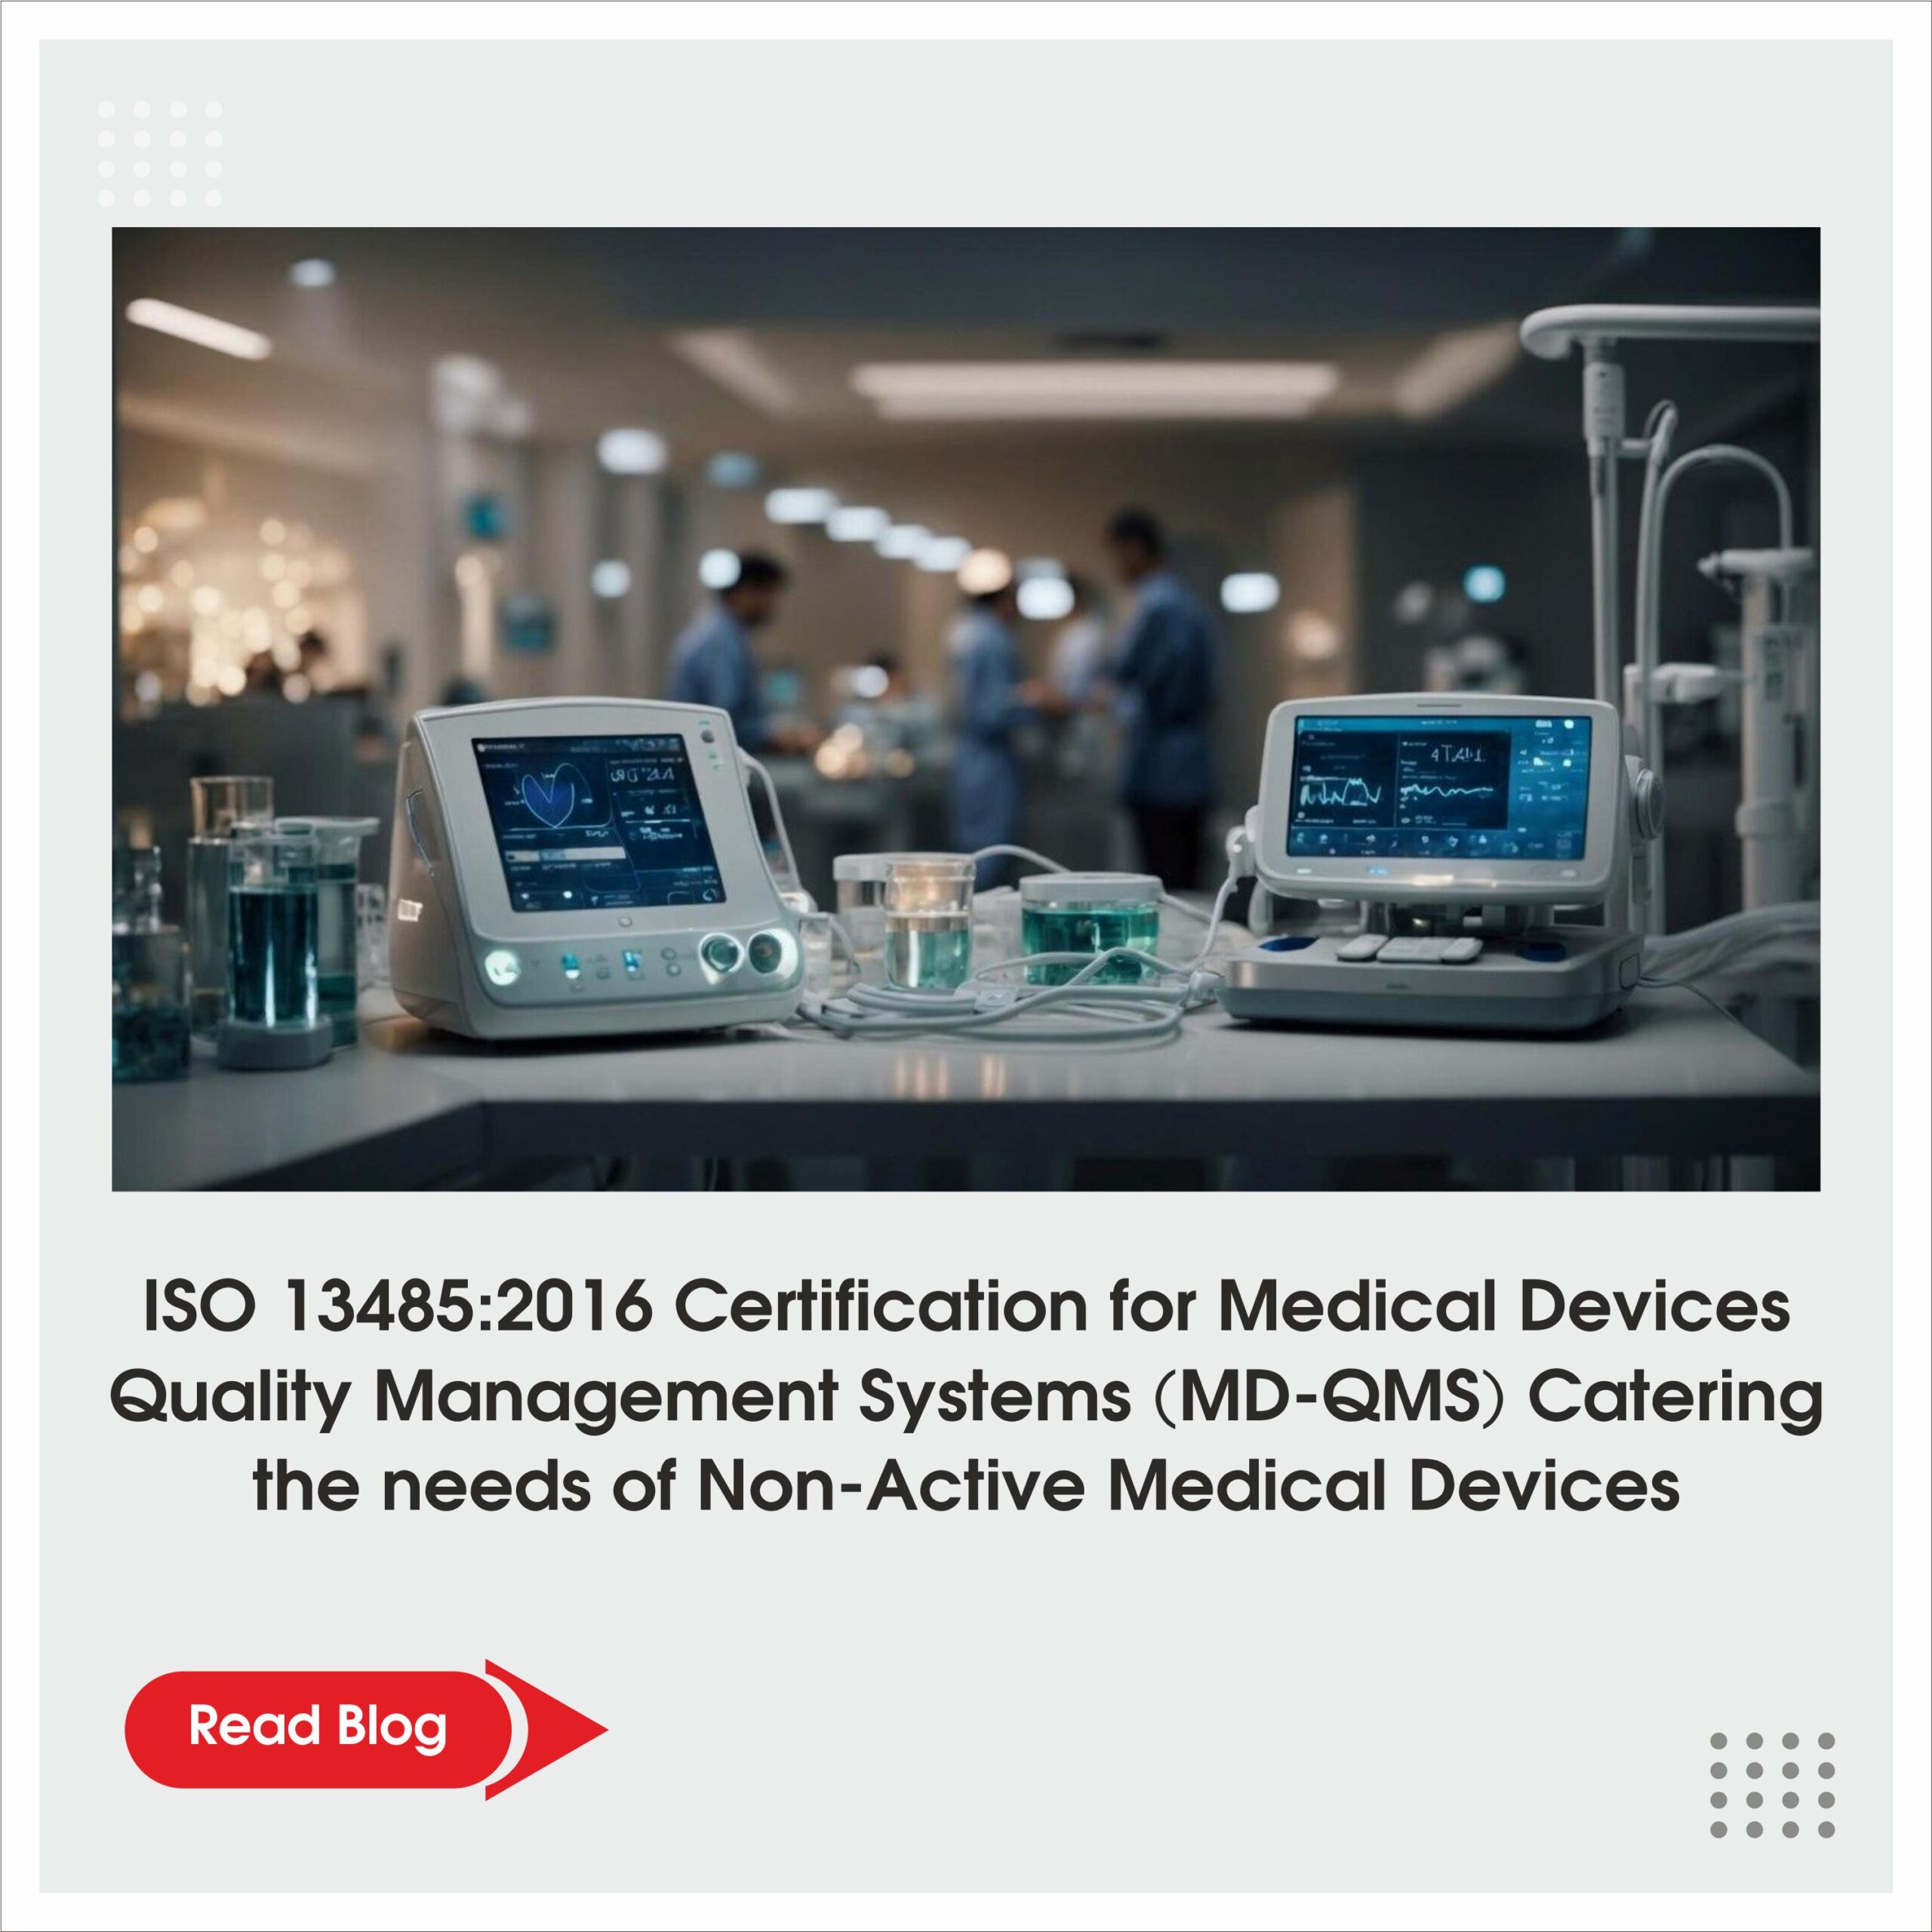 ISO 13485:2016 MD-QMS – Catering the needs of Non-Active Medical Devices